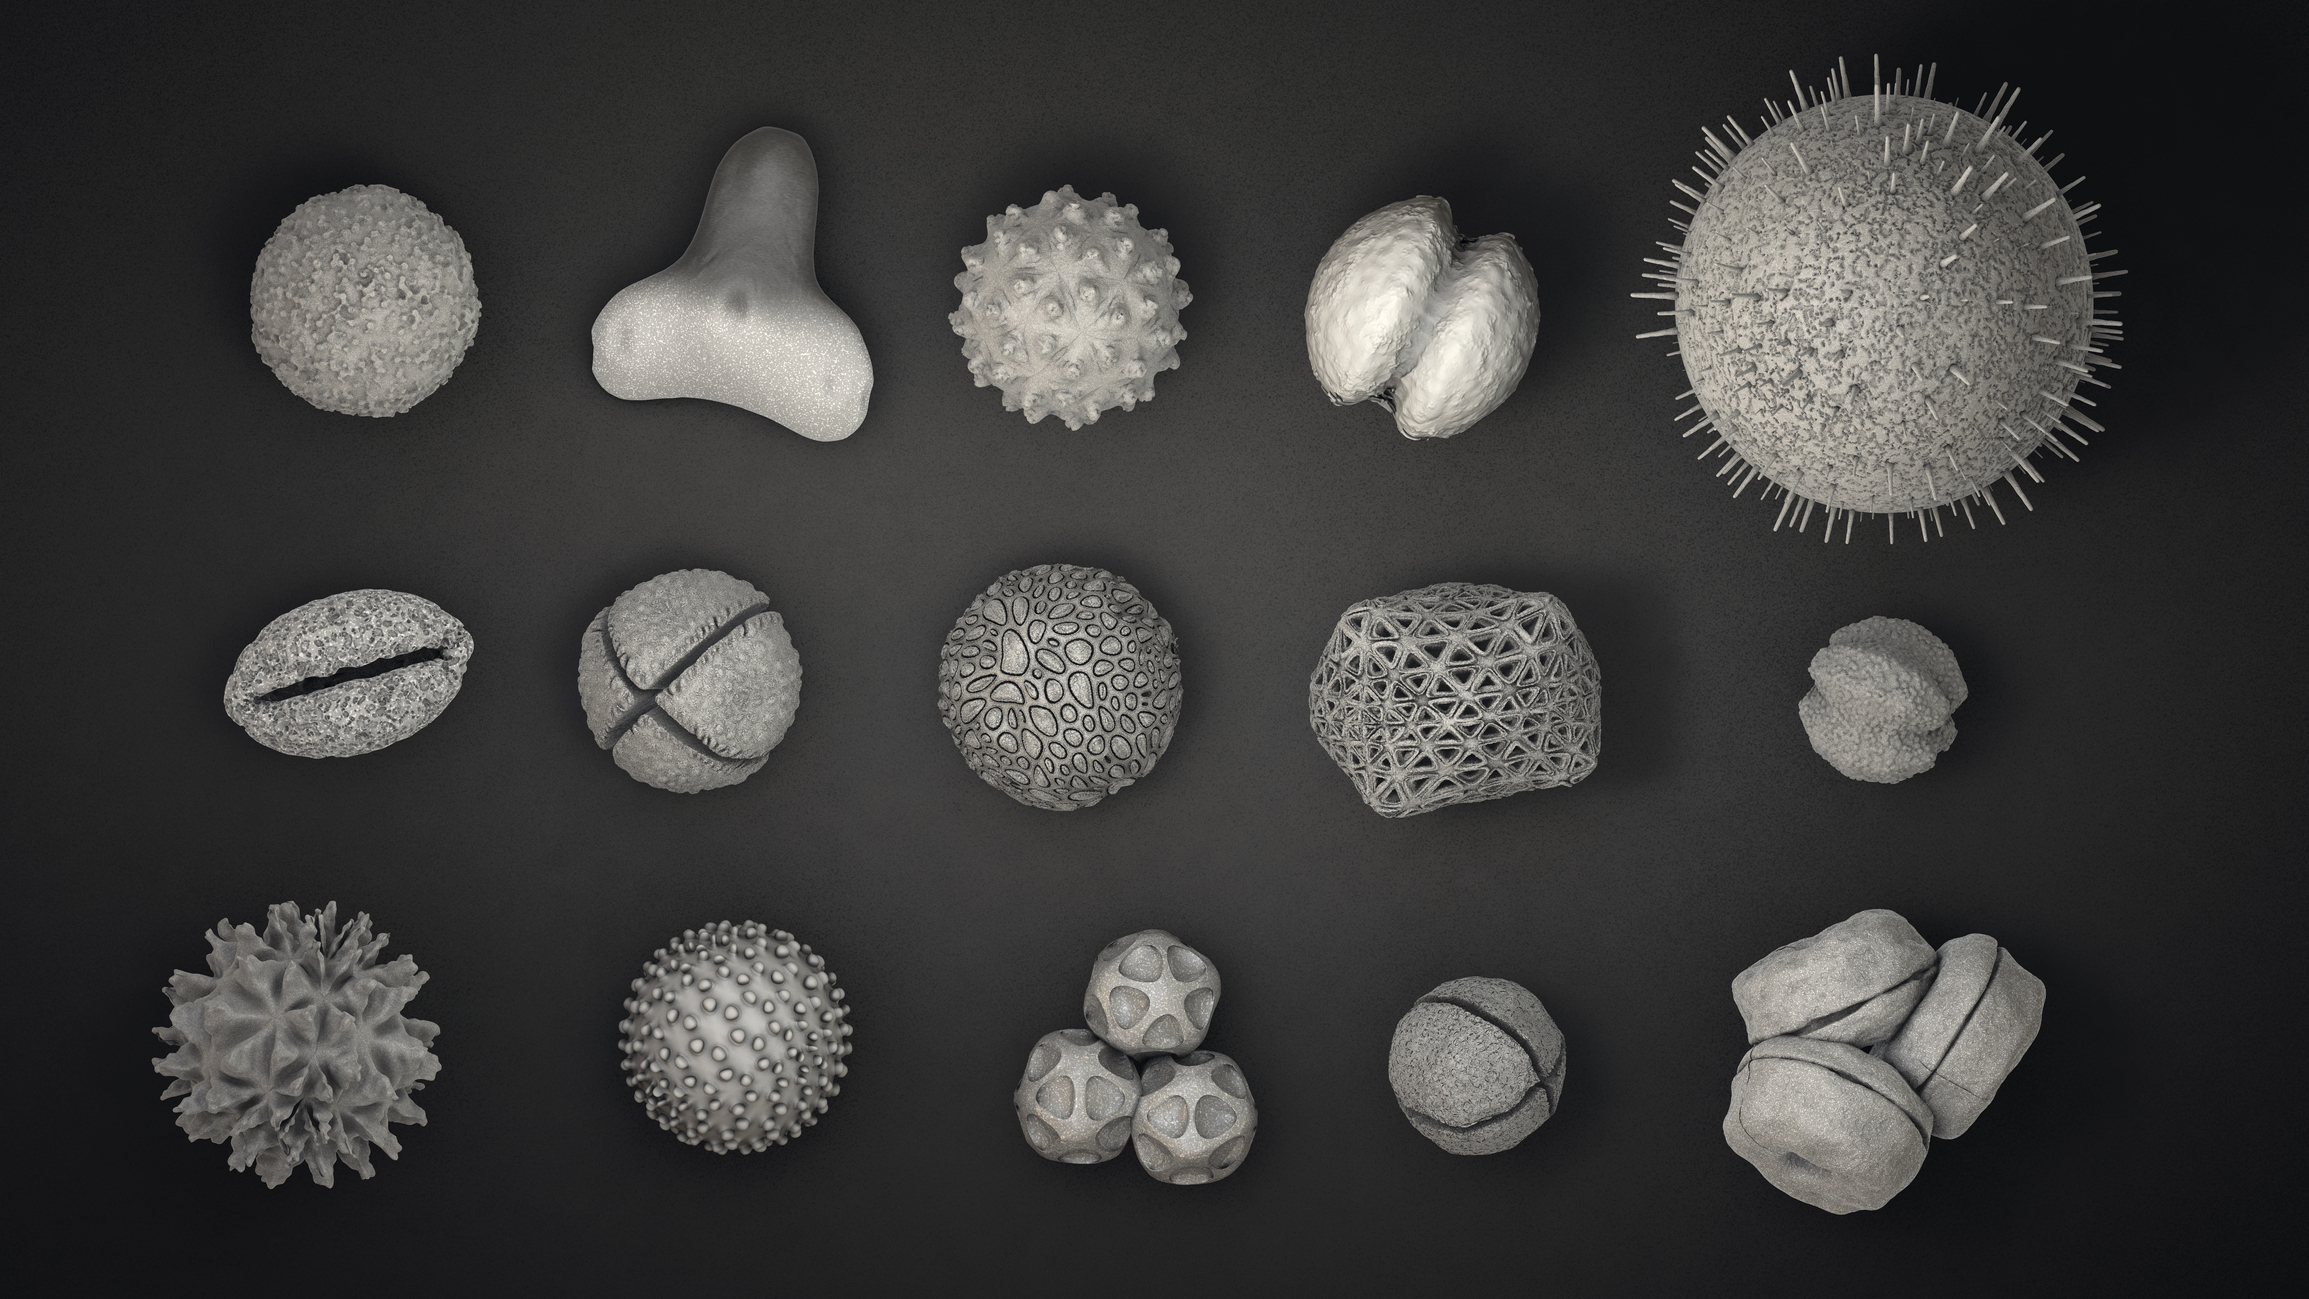 Black and while illustration of pollen grains of different shapes and sizes. Some are spiky, others are smooth and round